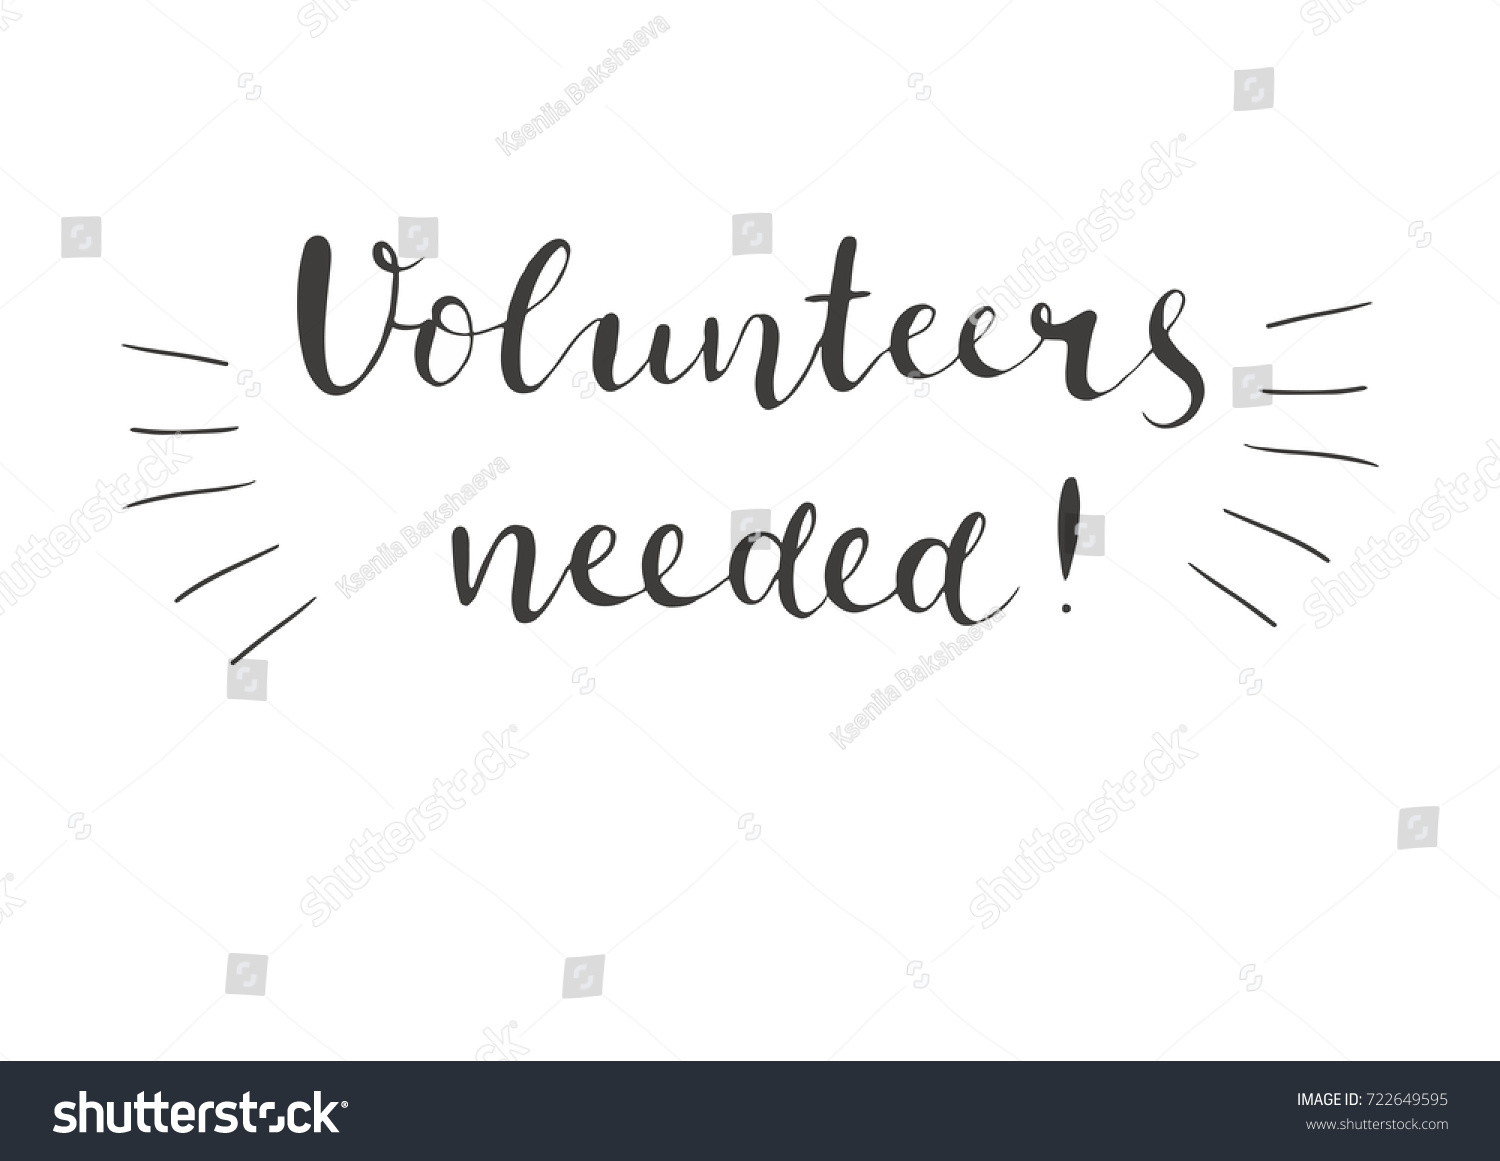 SVG of Volunteers needed. Hand written lettering isolated on white background. Vector illustration. svg